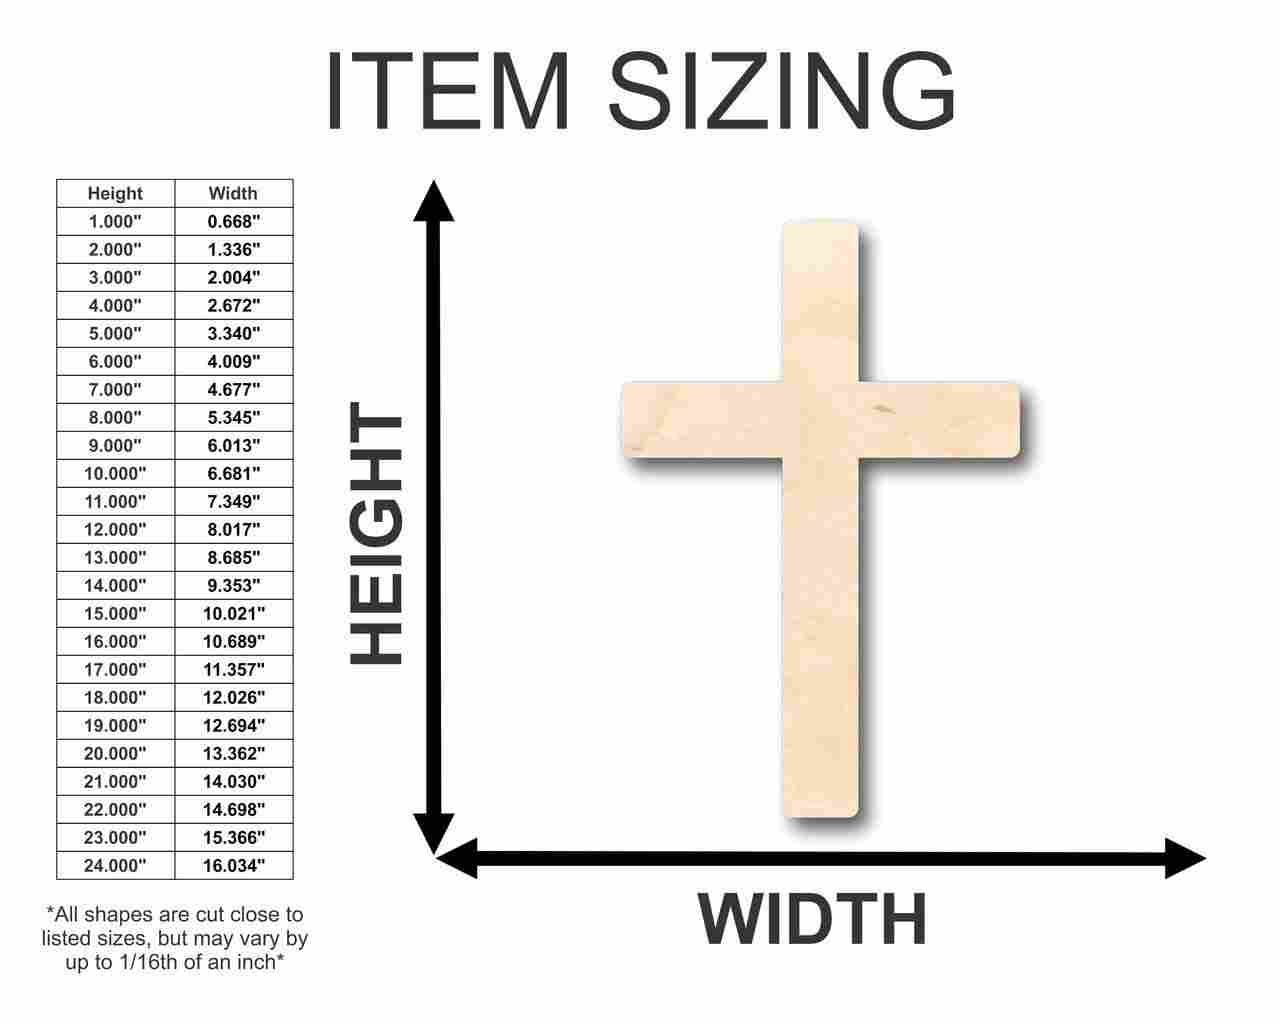 Unfinished Wood Cutout - 50-Pack Wooden Cross, Wood Pieces, Wood Shapes,  for Wooden Craft DIY Projects, Sunday School, Church, Home Wall Decoration,  4